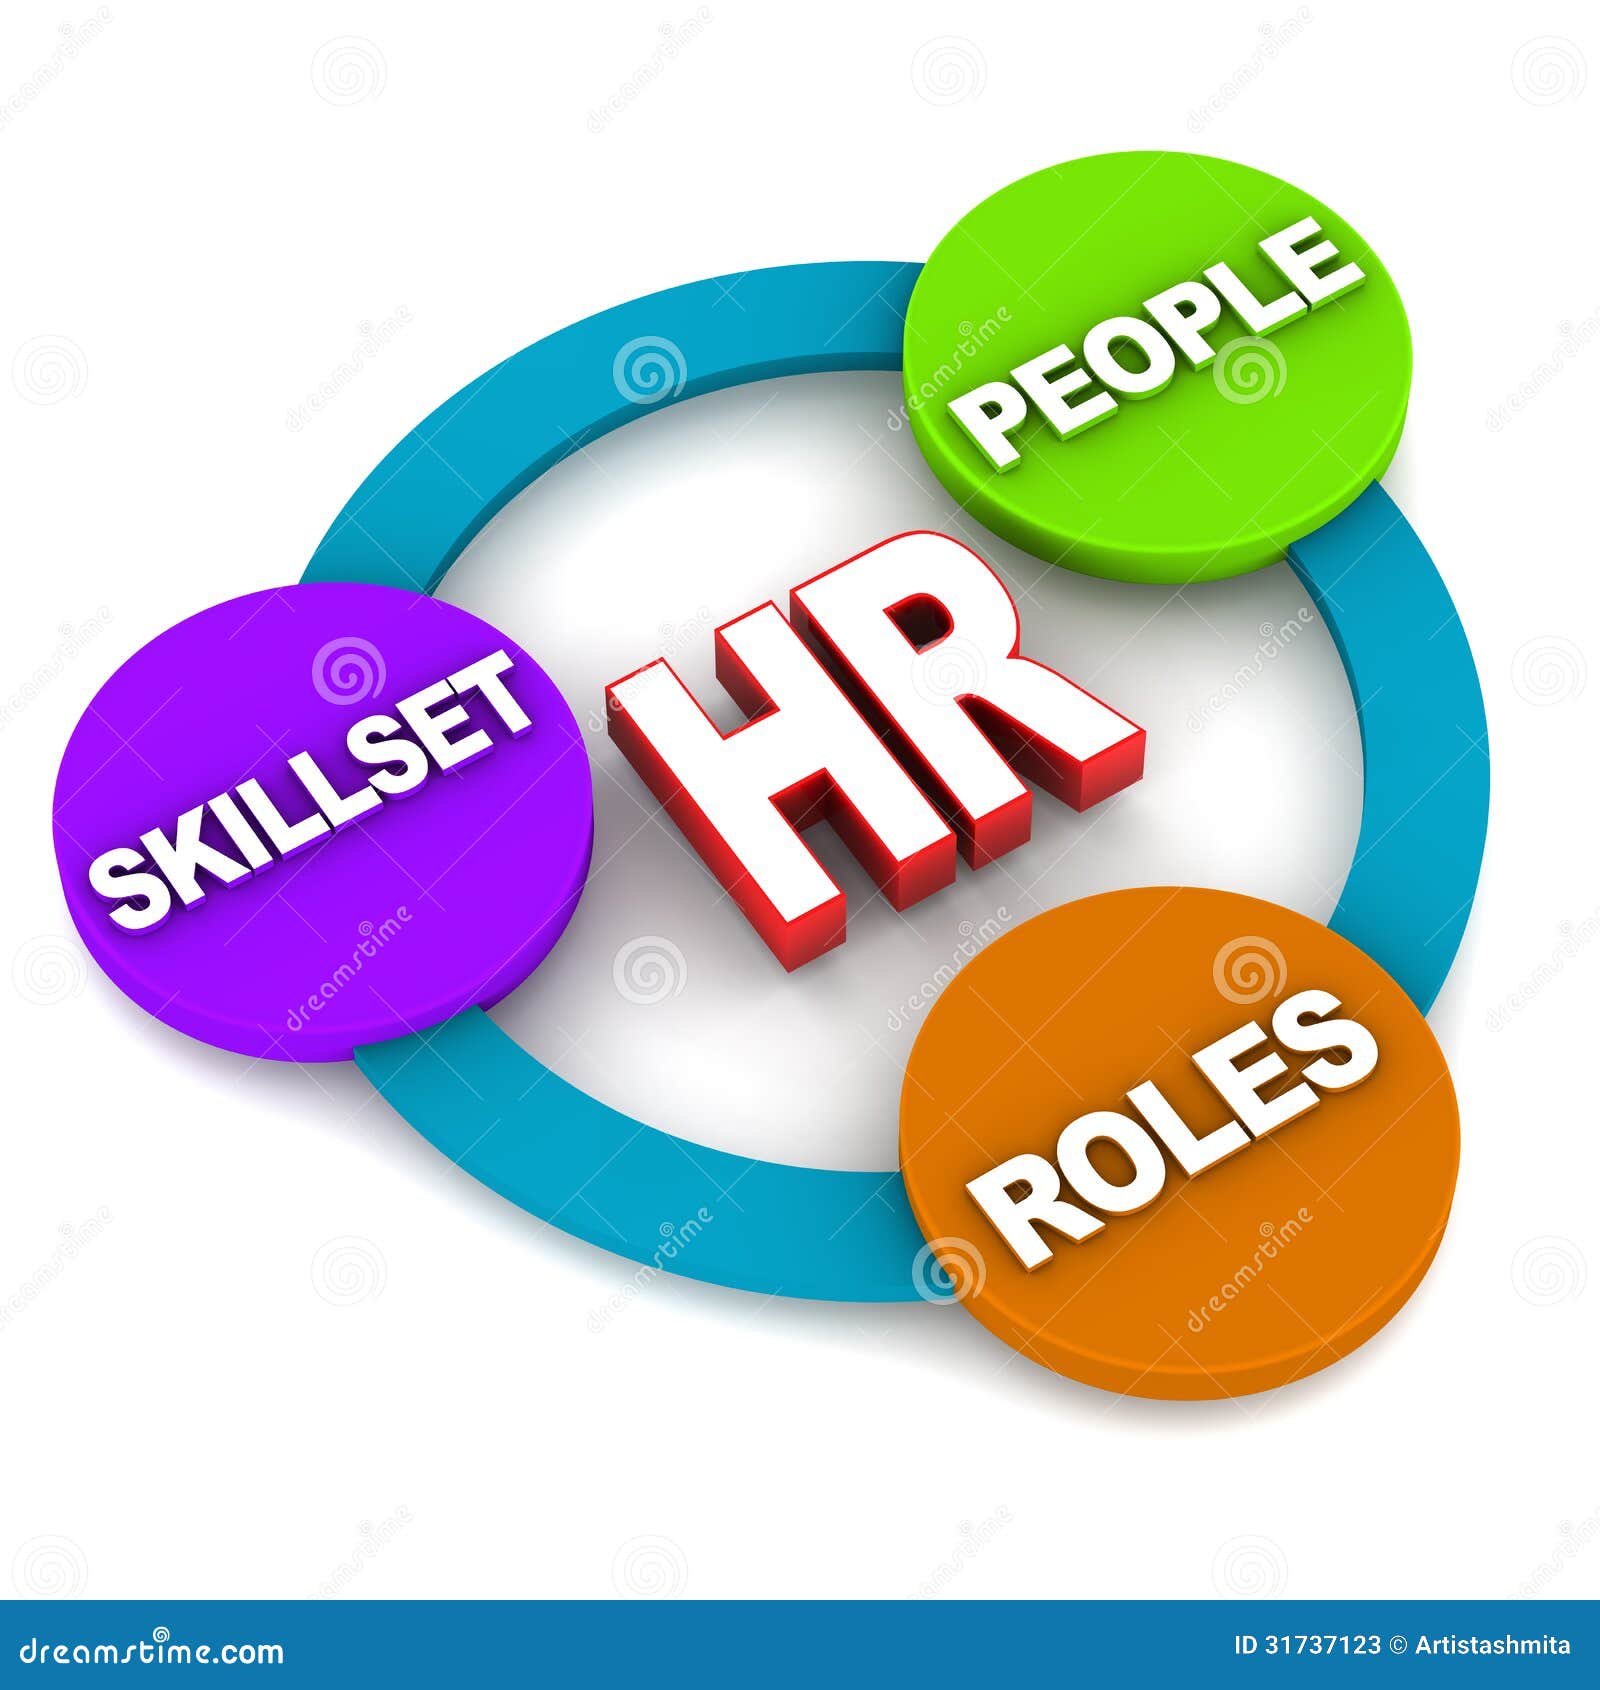 clipart human resources - photo #8